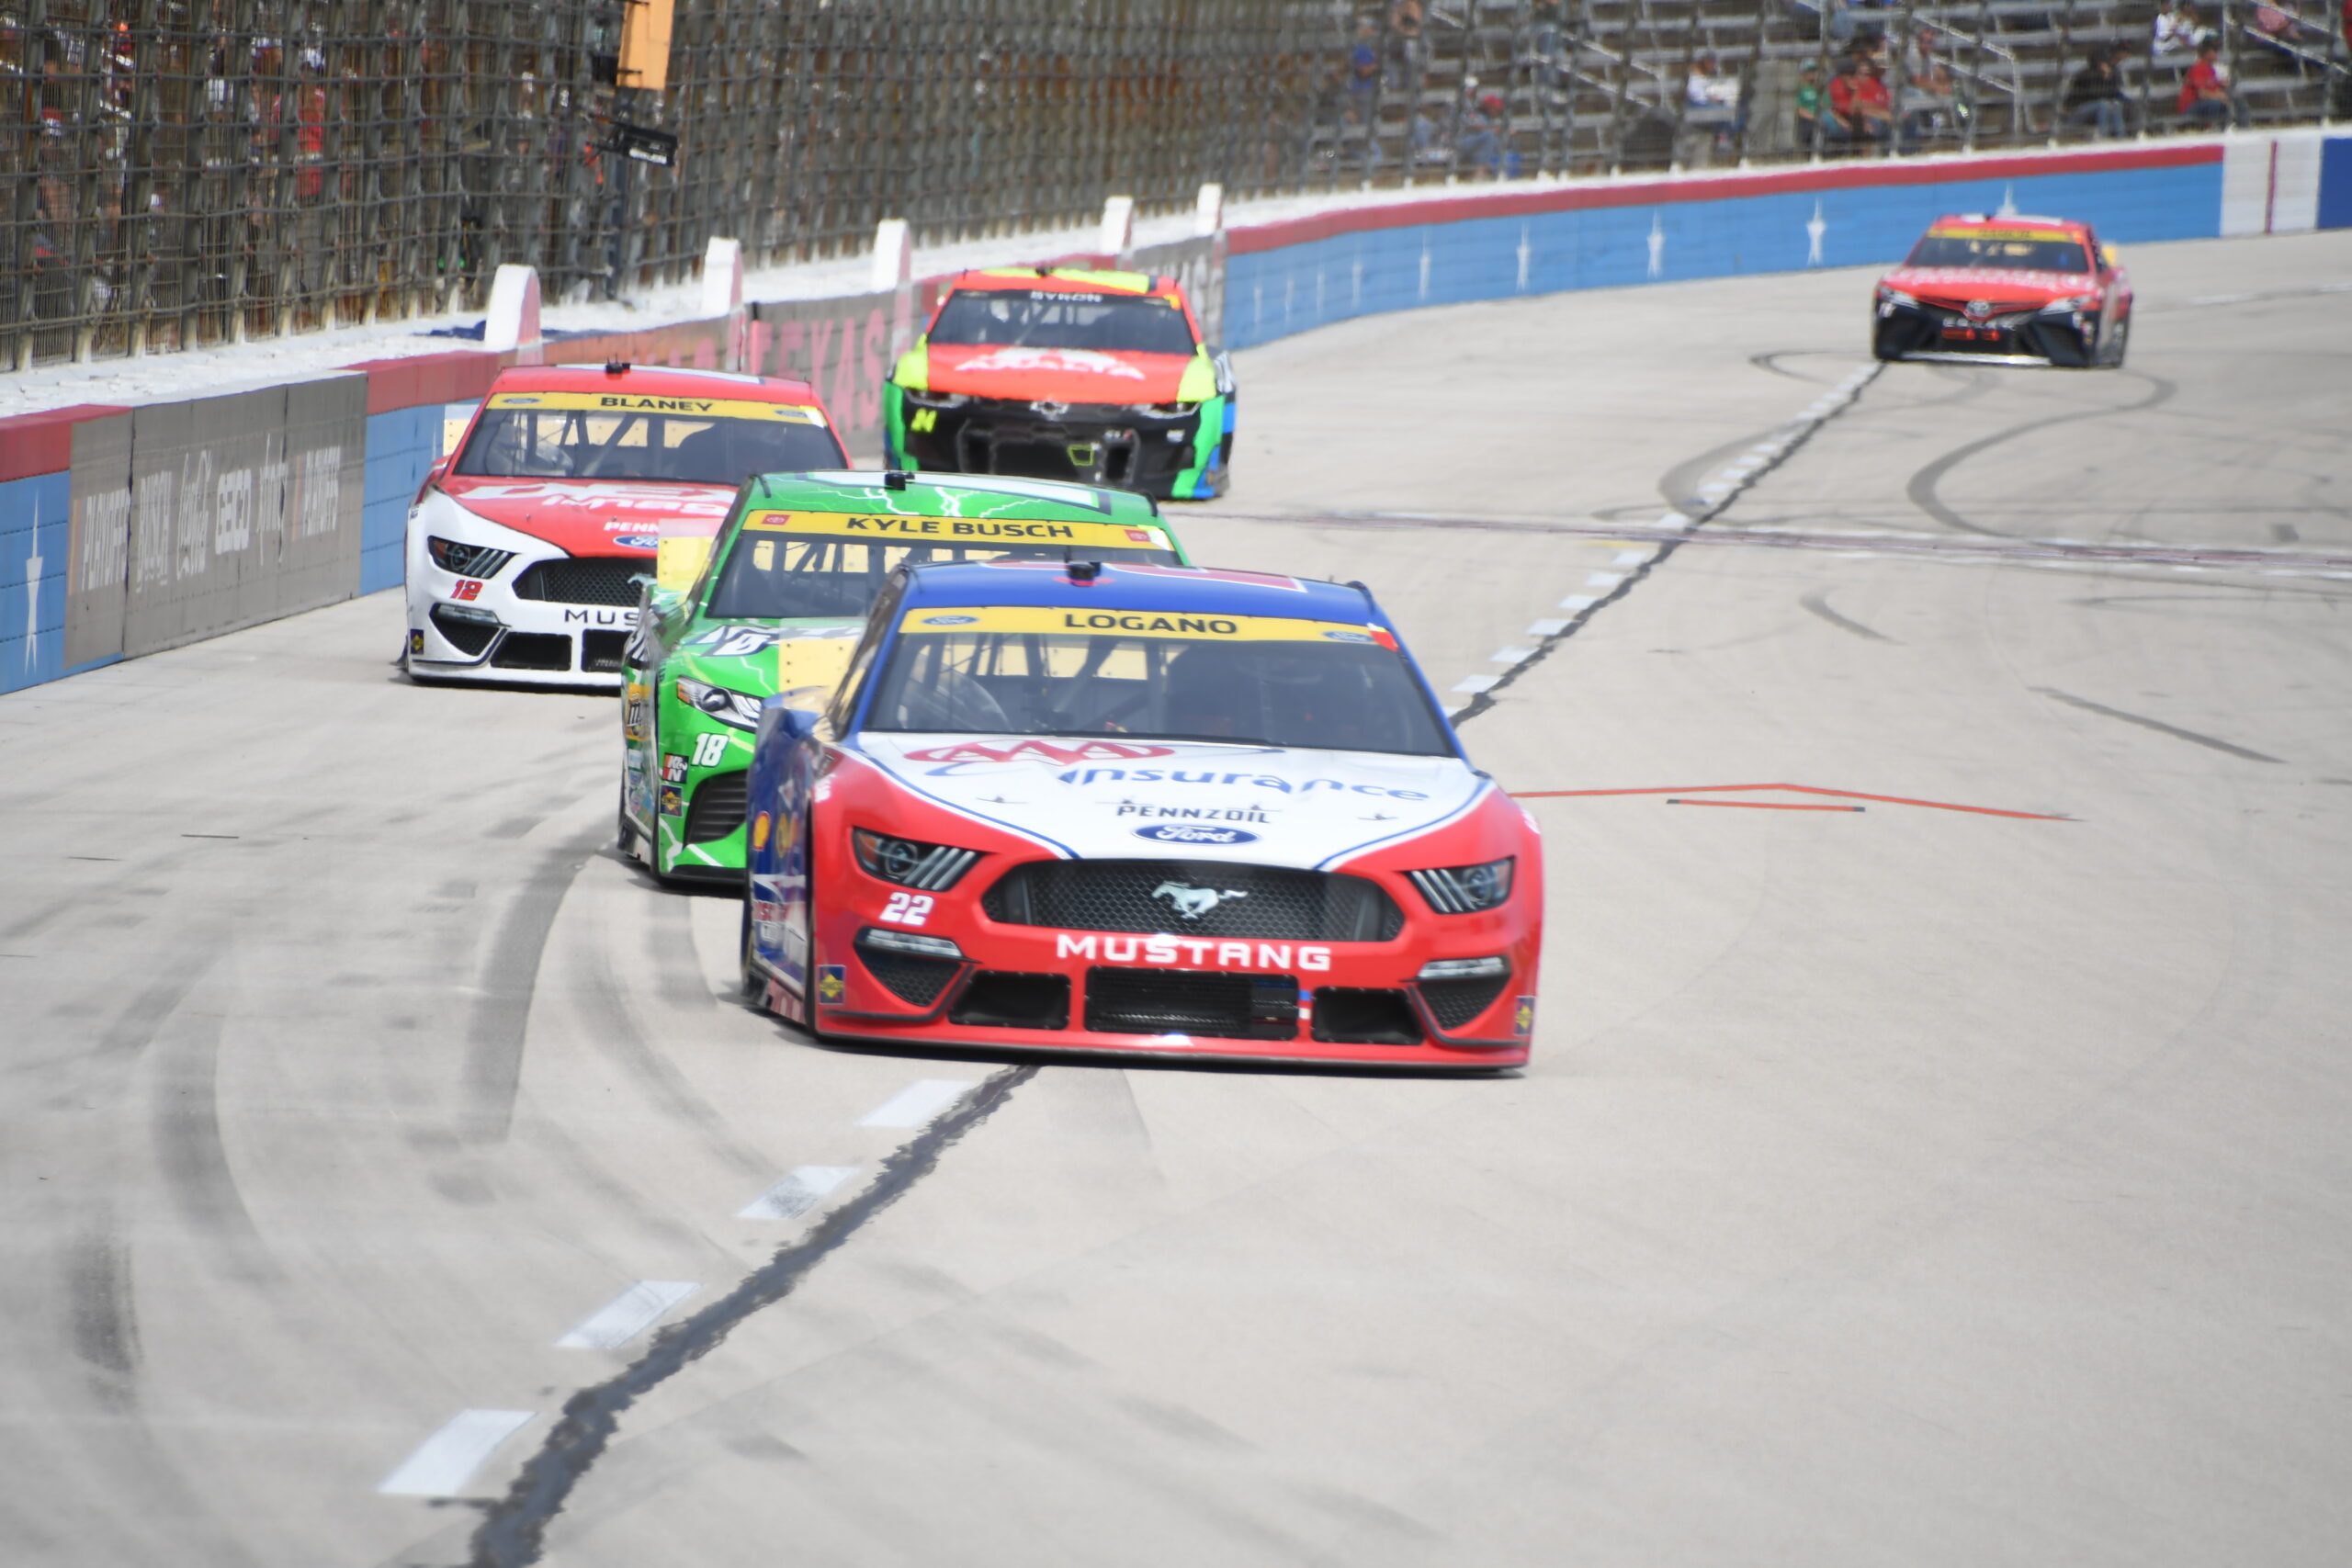 Can Joey Logano climb out of the early deficit he's in heading into Kansas? (Photo: Sean Folsom | The Podium Finish)